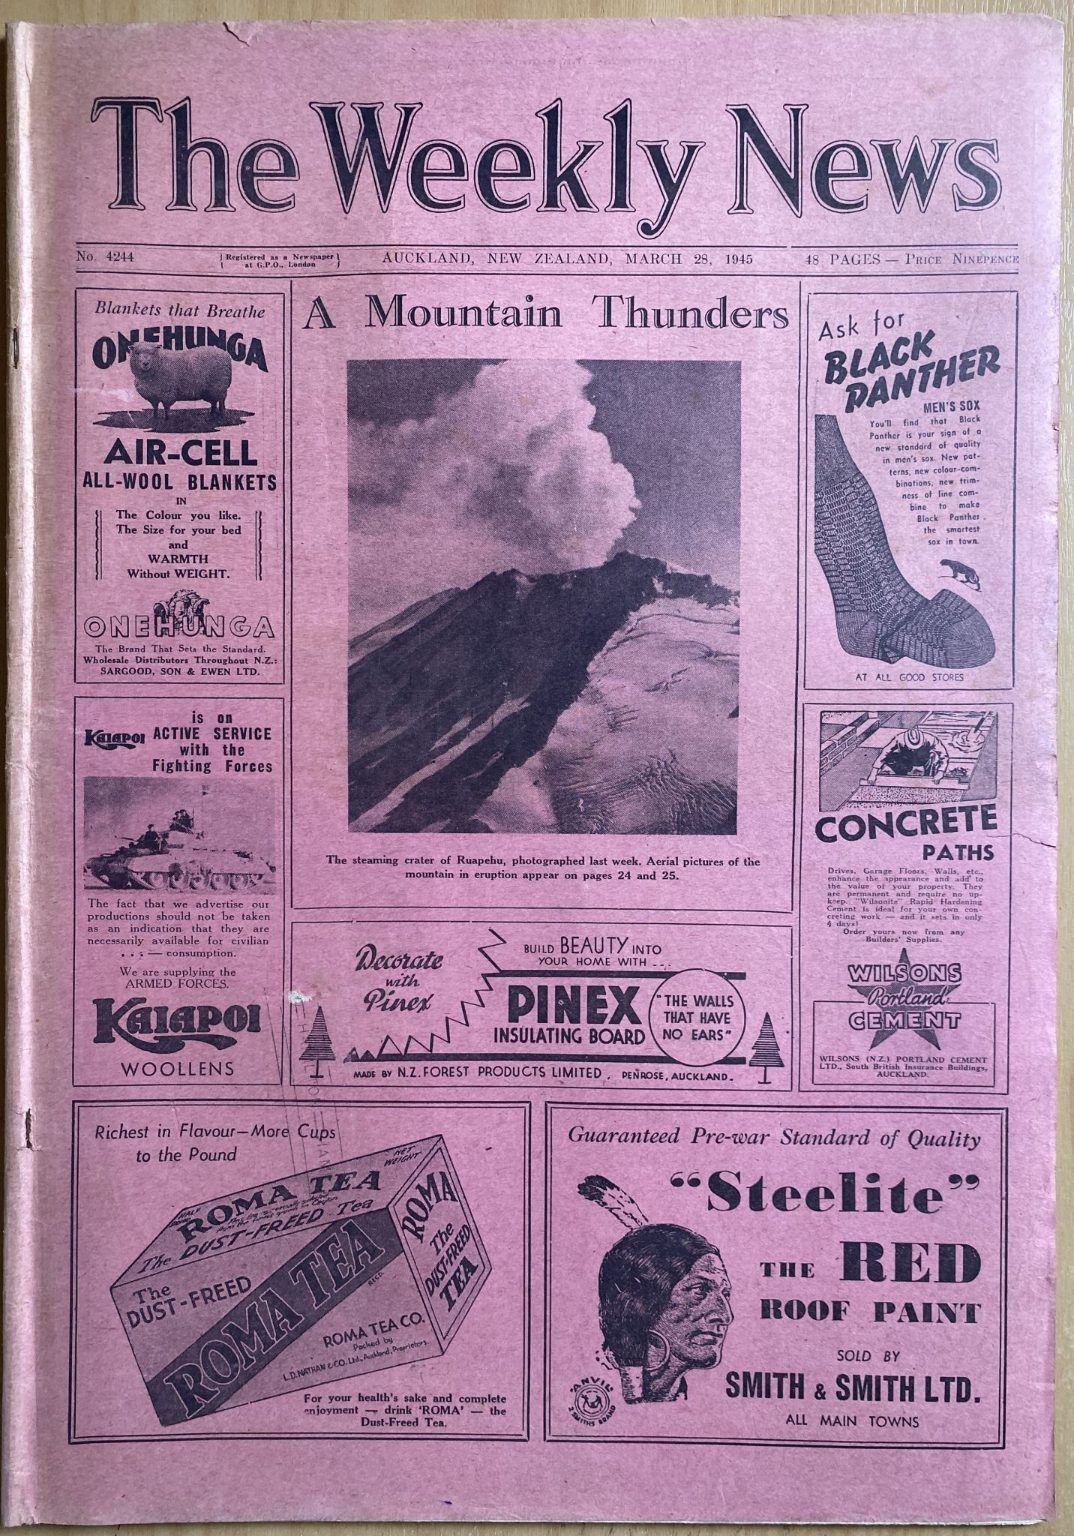 OLD NEWSPAPER: The Weekly News - No. 4244, 28 March 1945